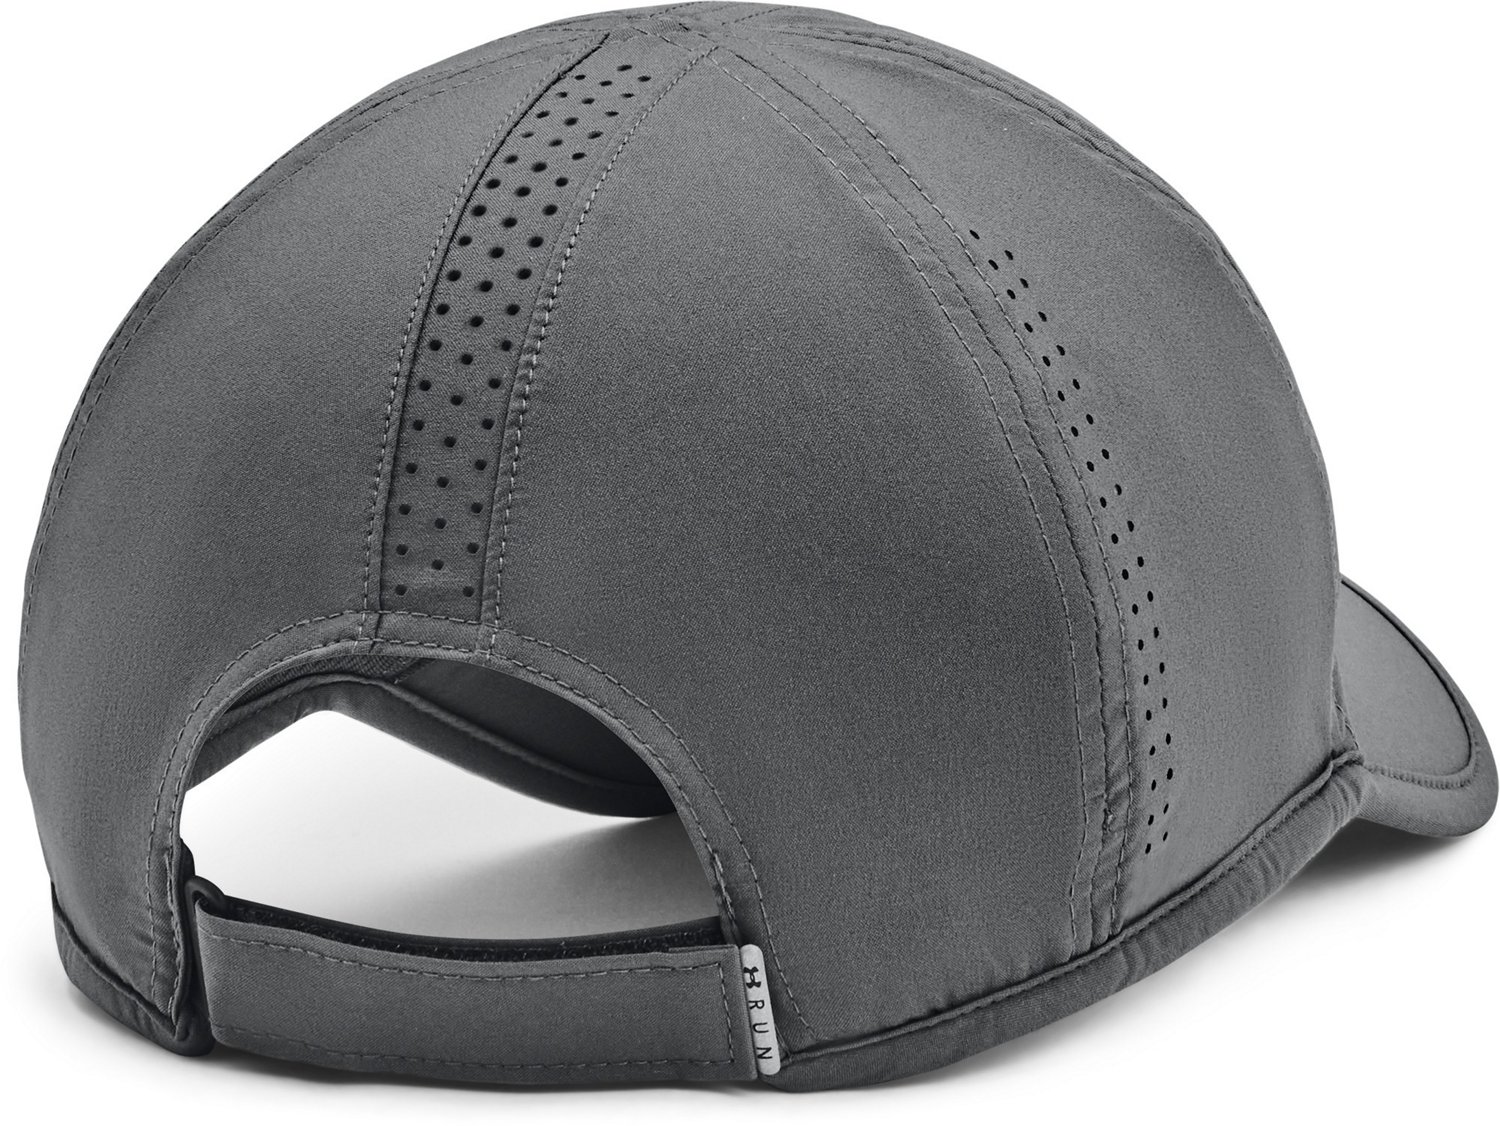 Under Armour Touch Skull Cap